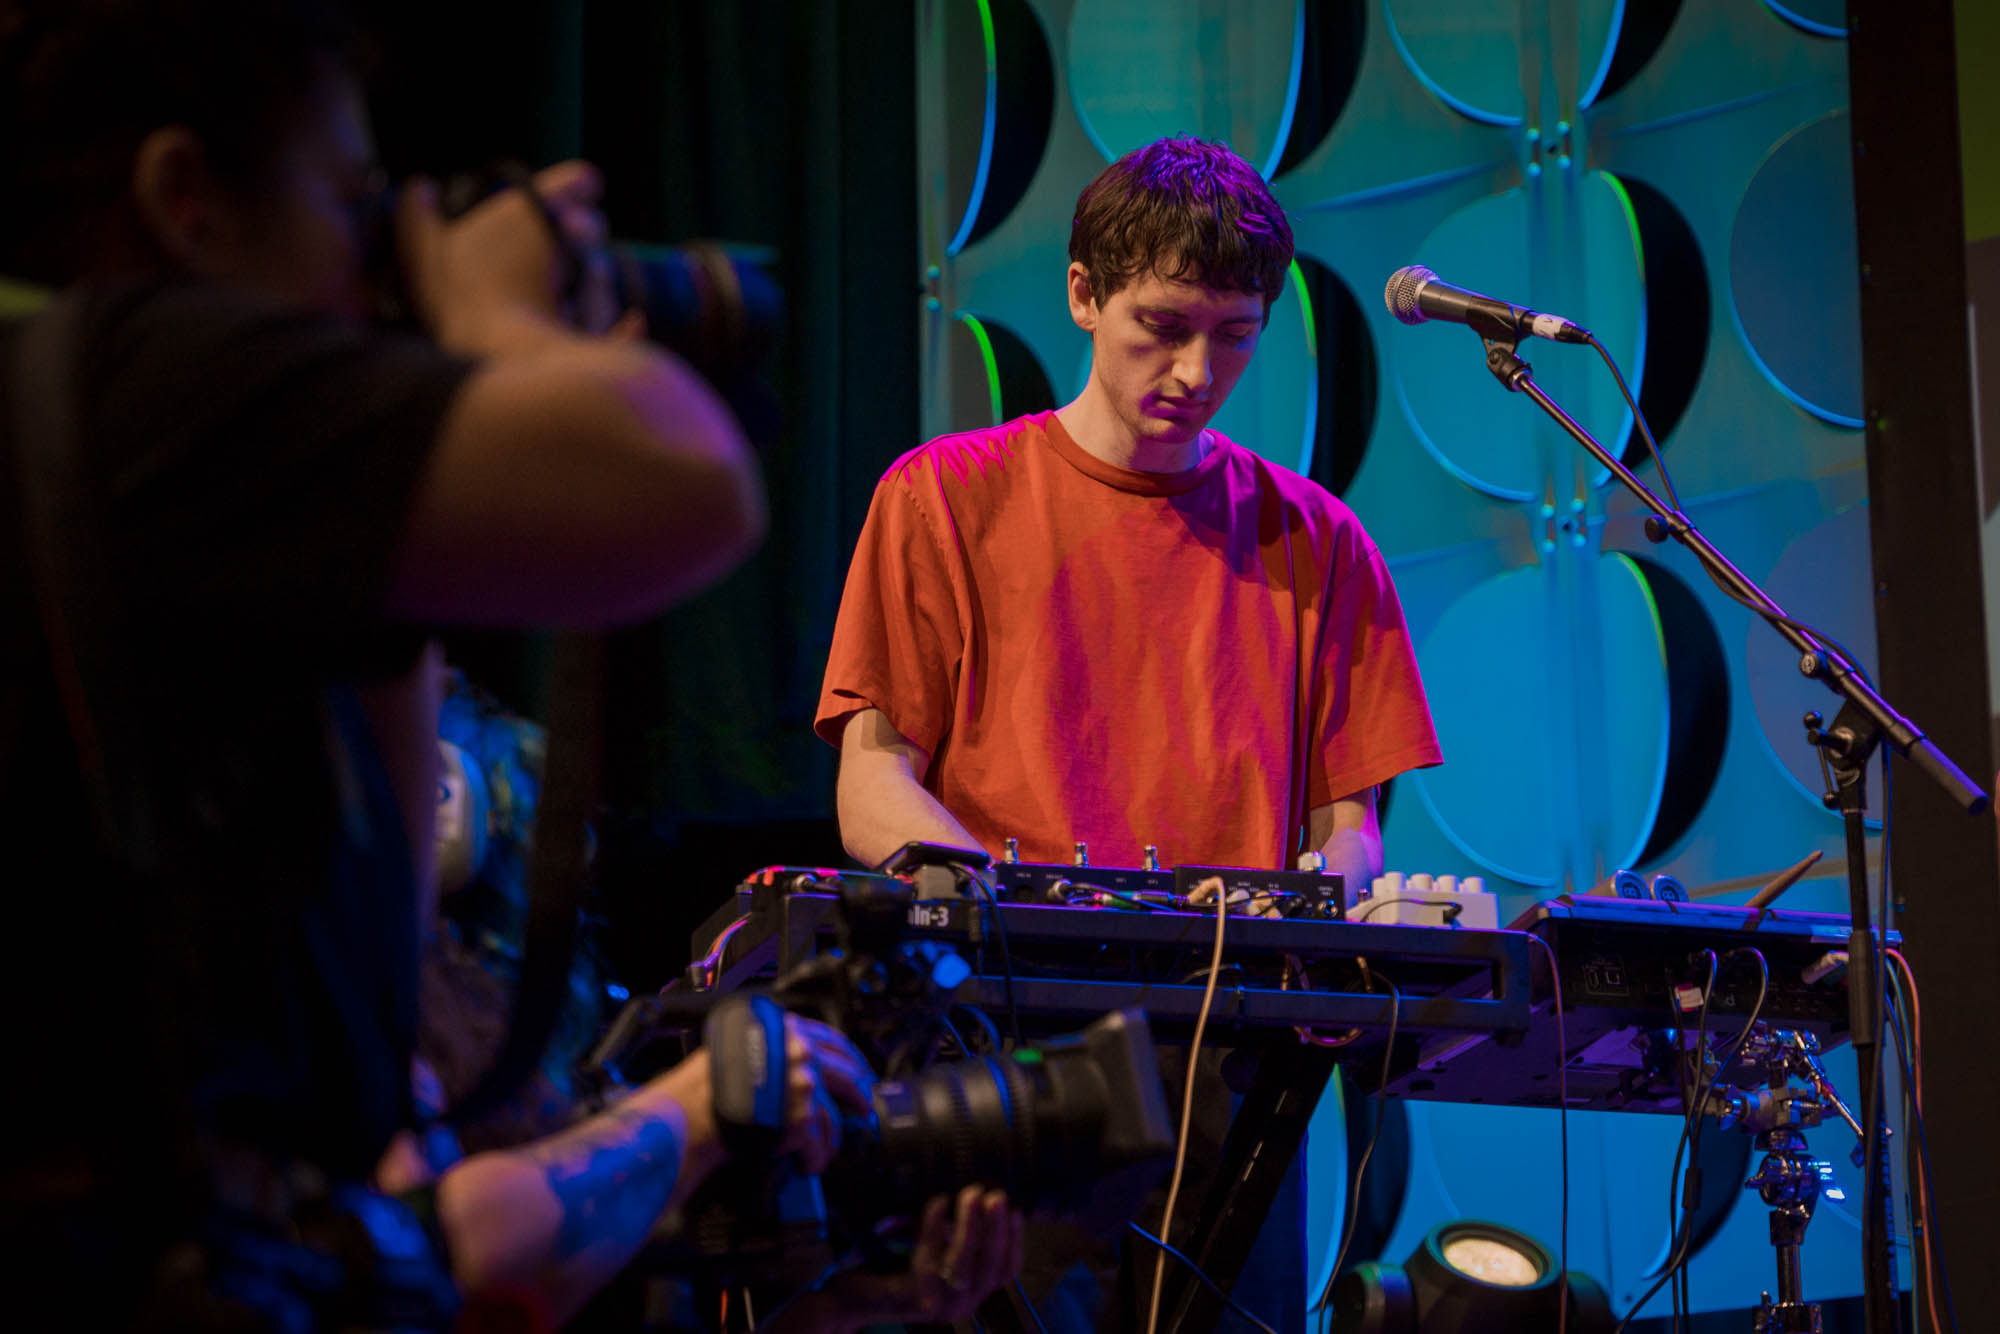 A musician playing keys on stage